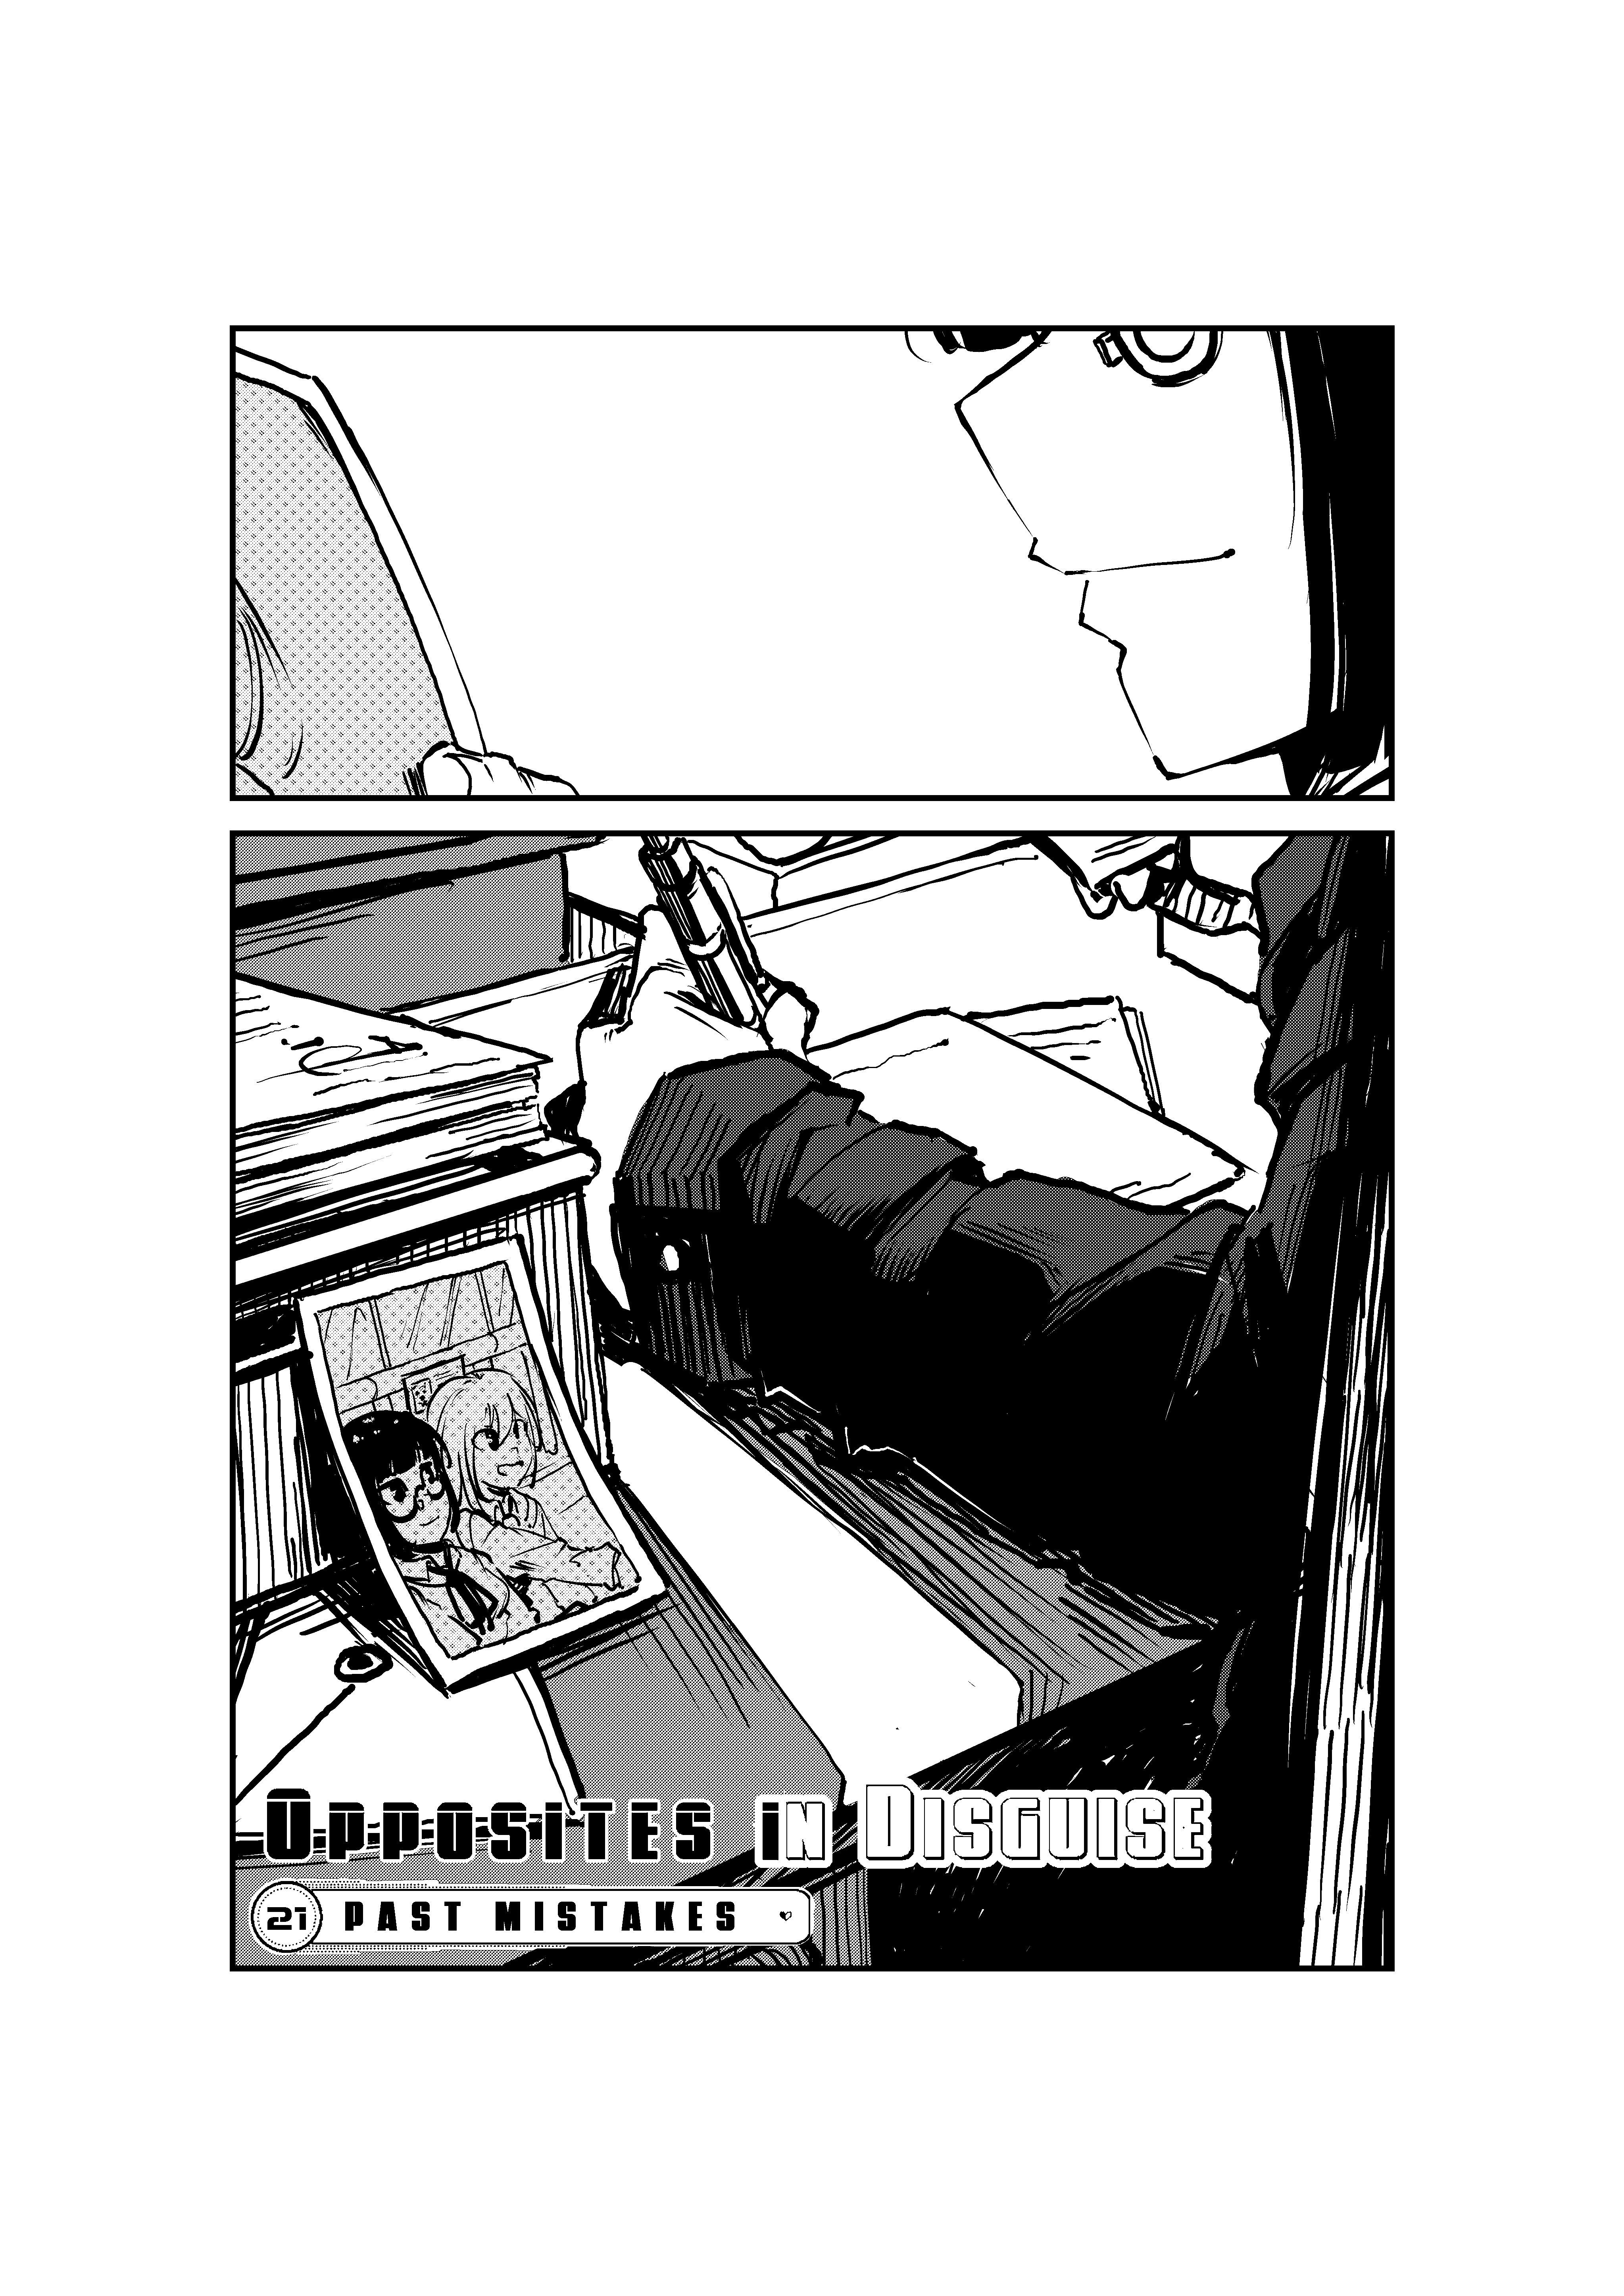 Opposites In Disguise - 21 page 6-43877a41